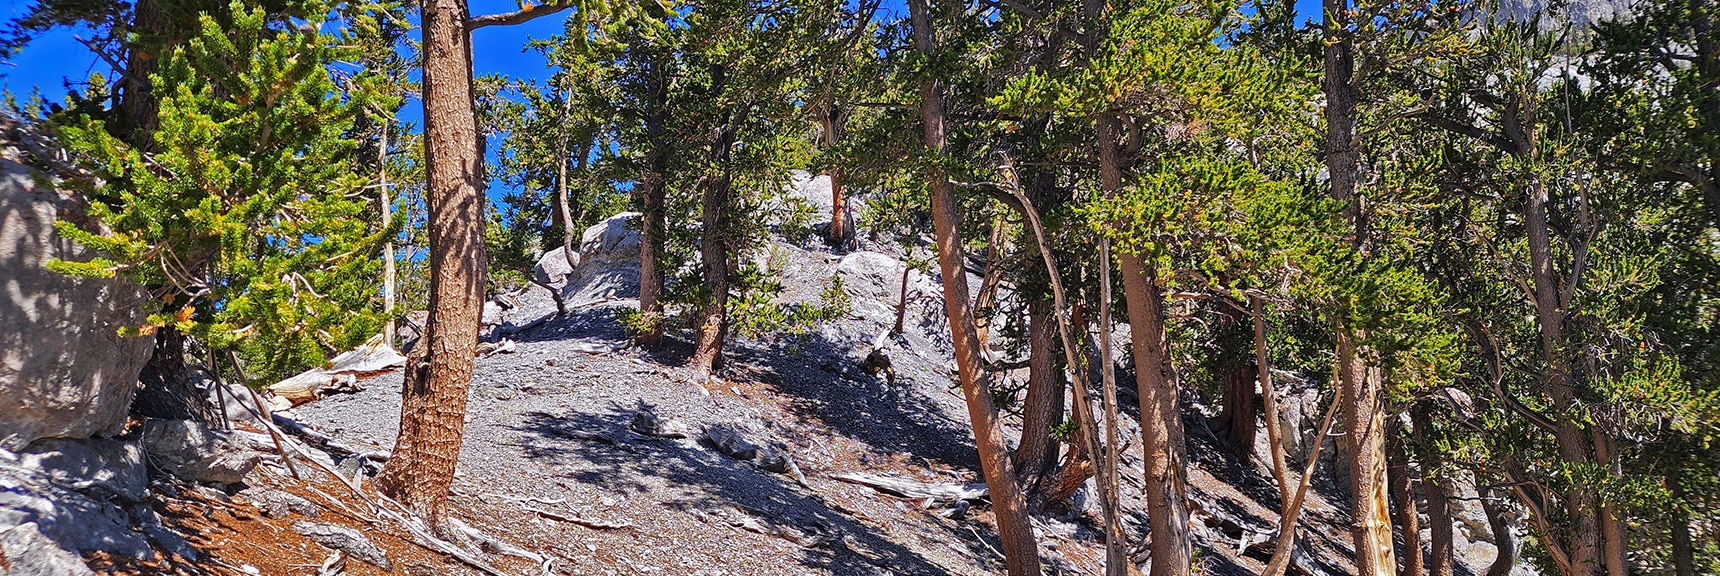 Final Stretch Toward Mummy Mt. Traditional Avalanche Slope Approach | Mummy Mountain Grand Crossing | Lee Canyon to Deer Creek Road | Mt Charleston Wilderness | Spring Mountains, Nevada |